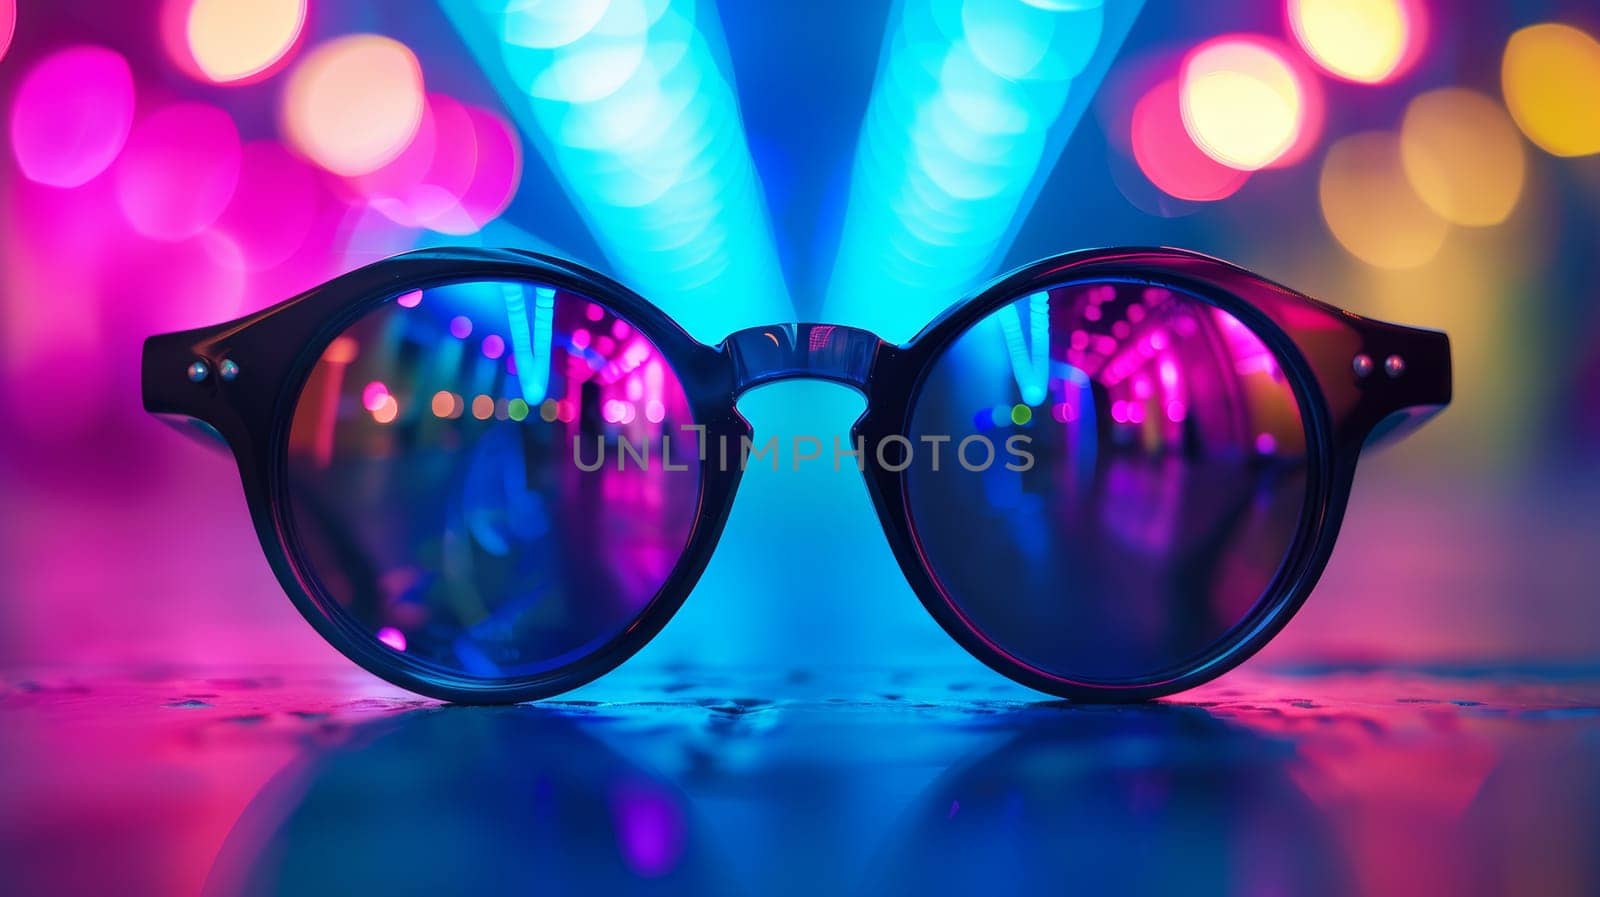 Nightlife Party Reflection in Sunglasses at Bar or Nightclub with Neon Lights and Bokeh